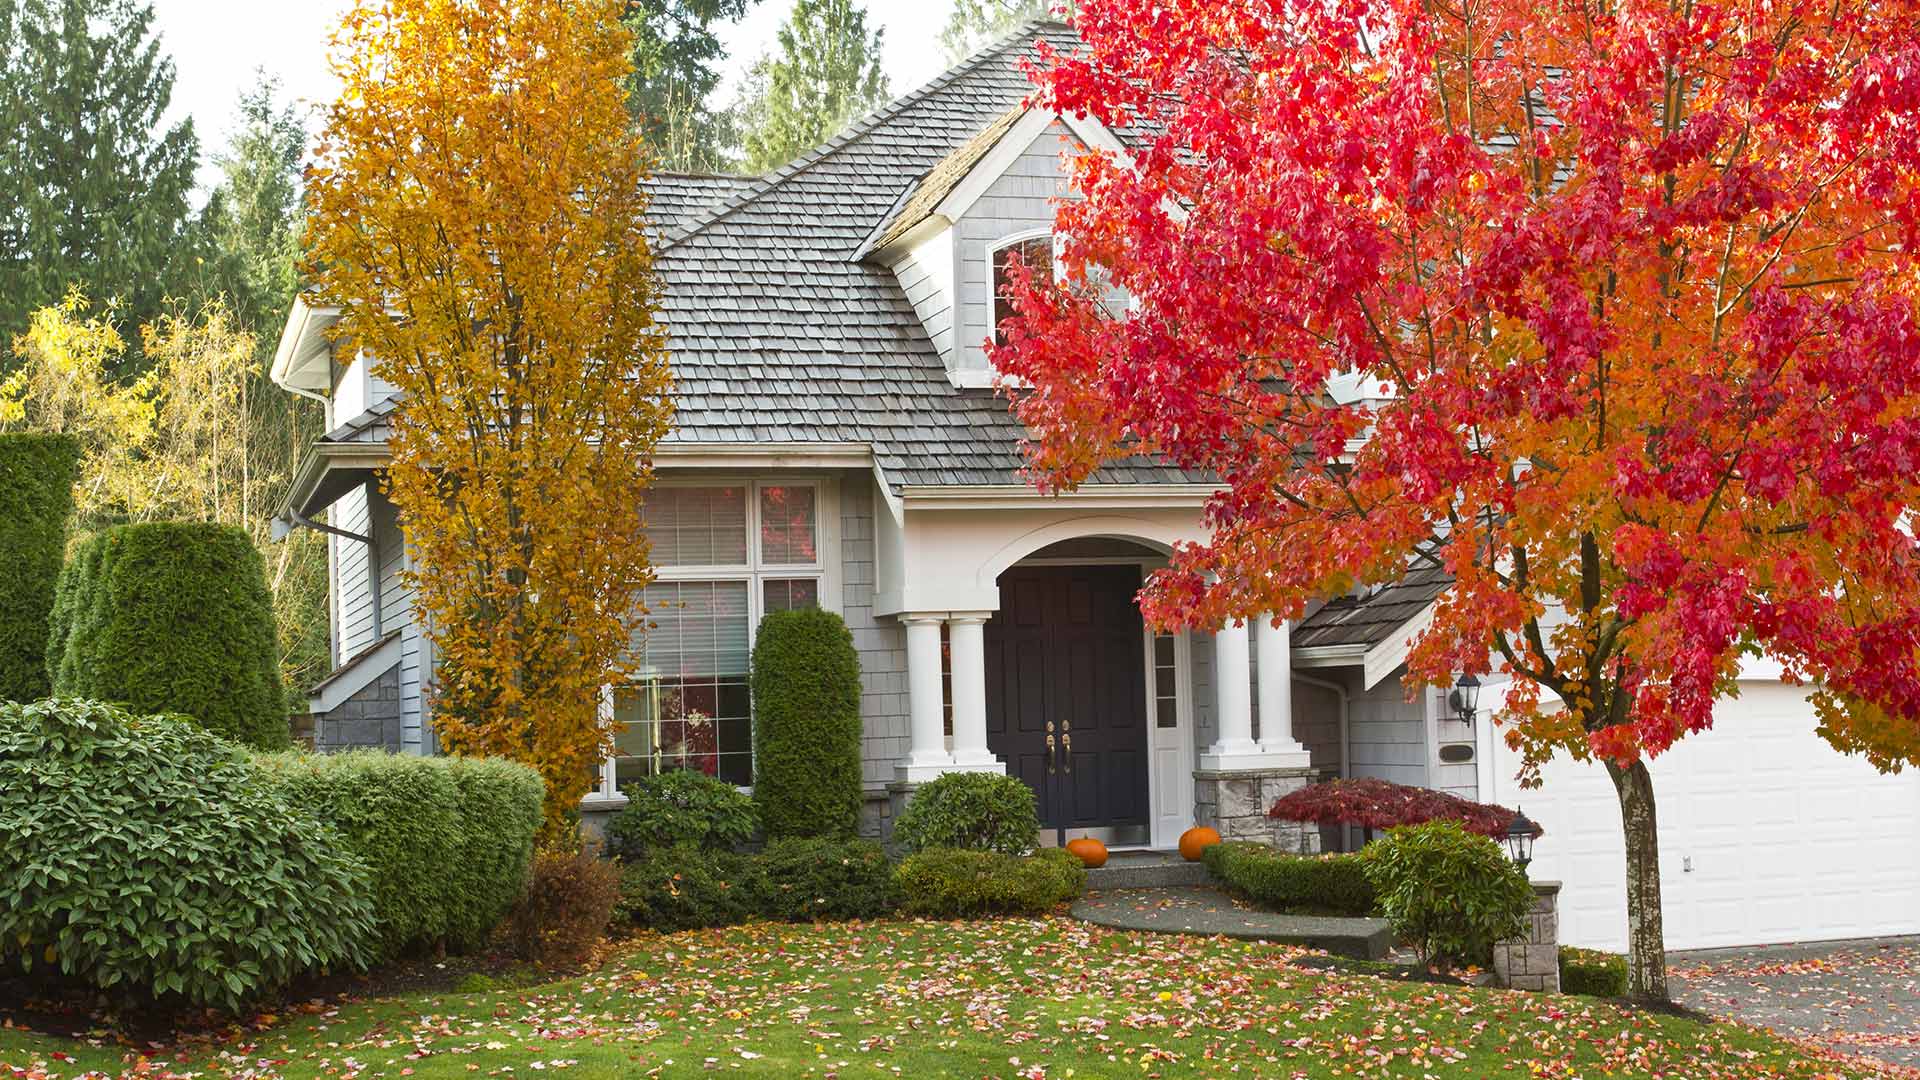 A Gresham, OR home in the fall with leaves and pumpkins.